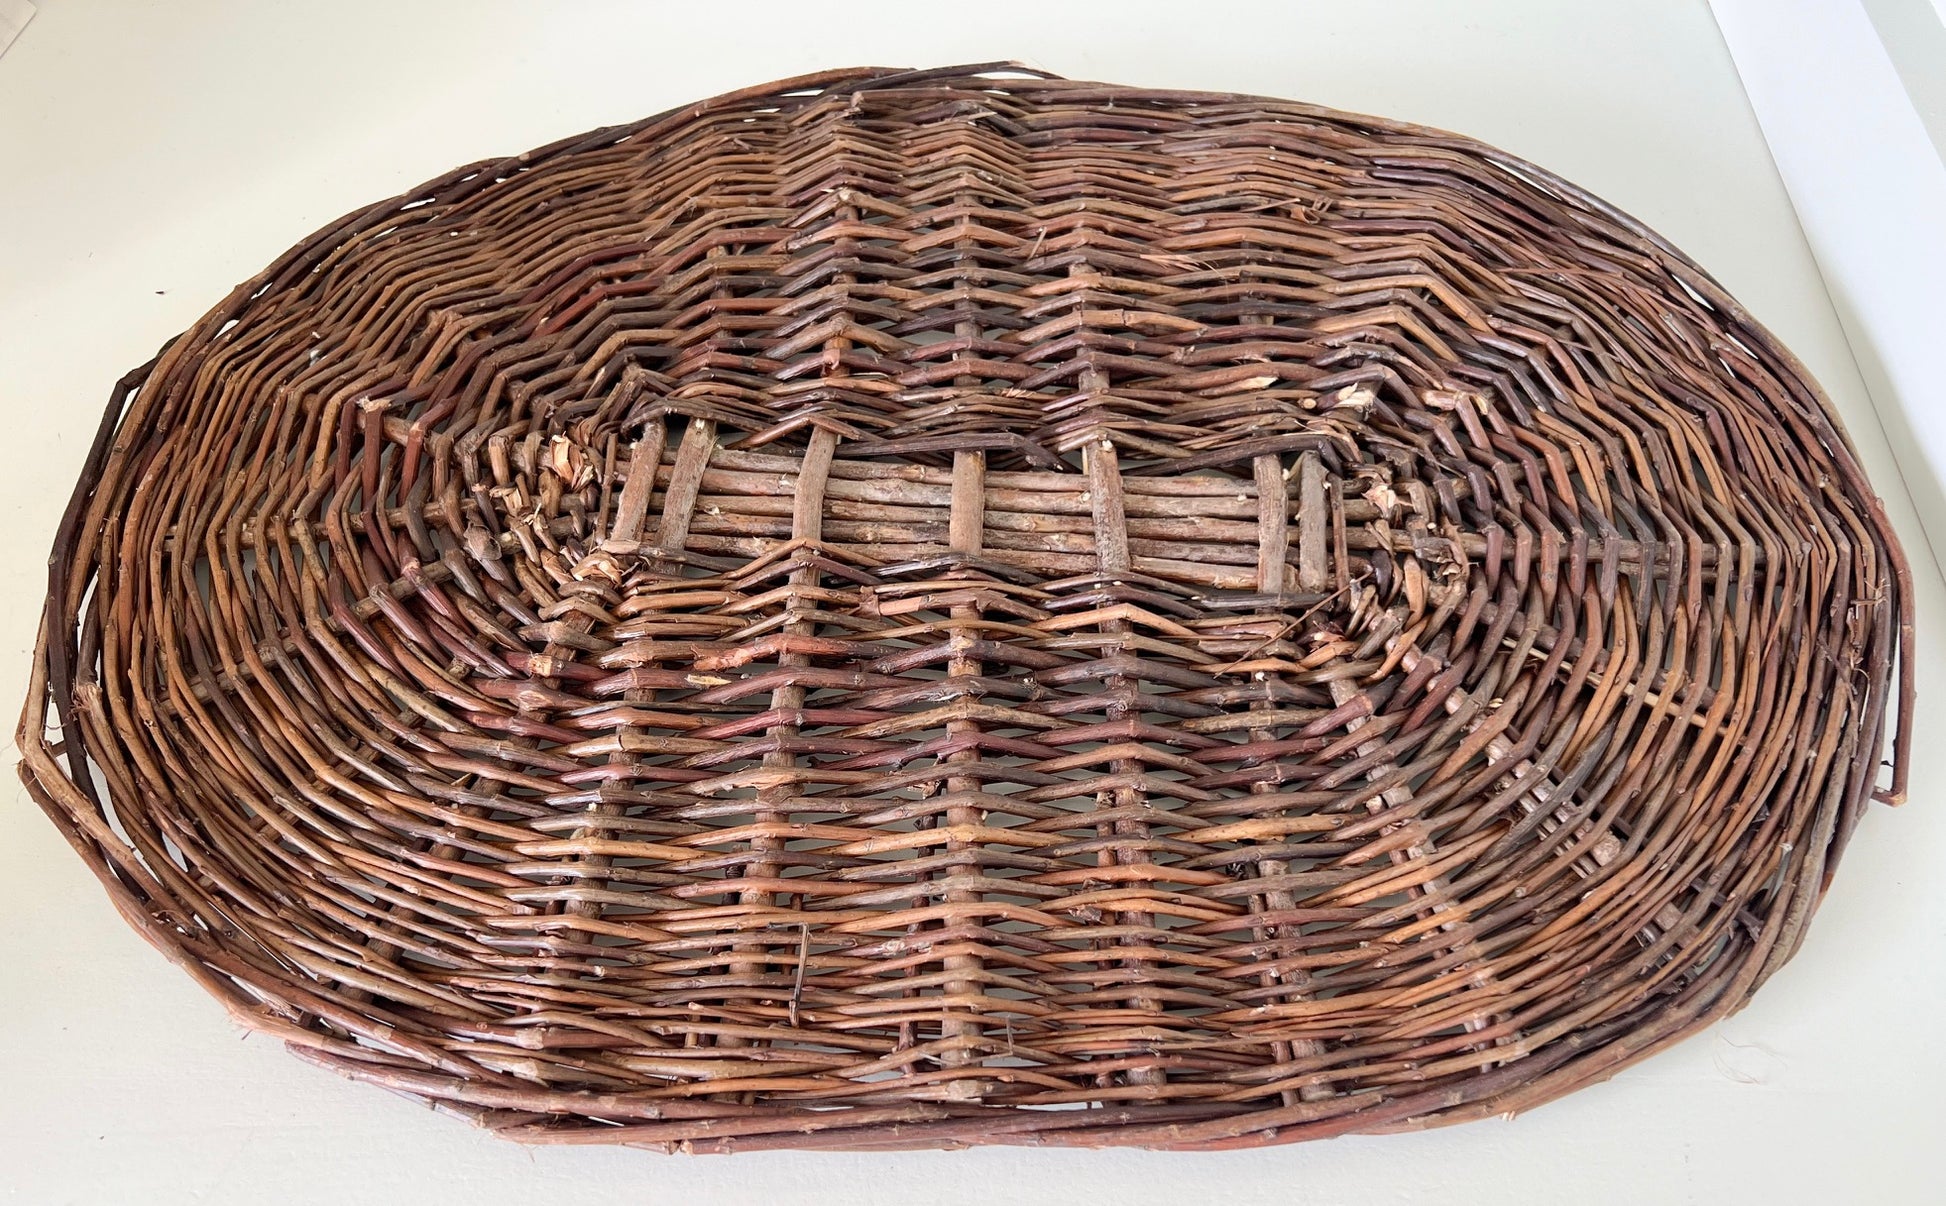 3/4 top view of Handwoven oval placemat in brown tones